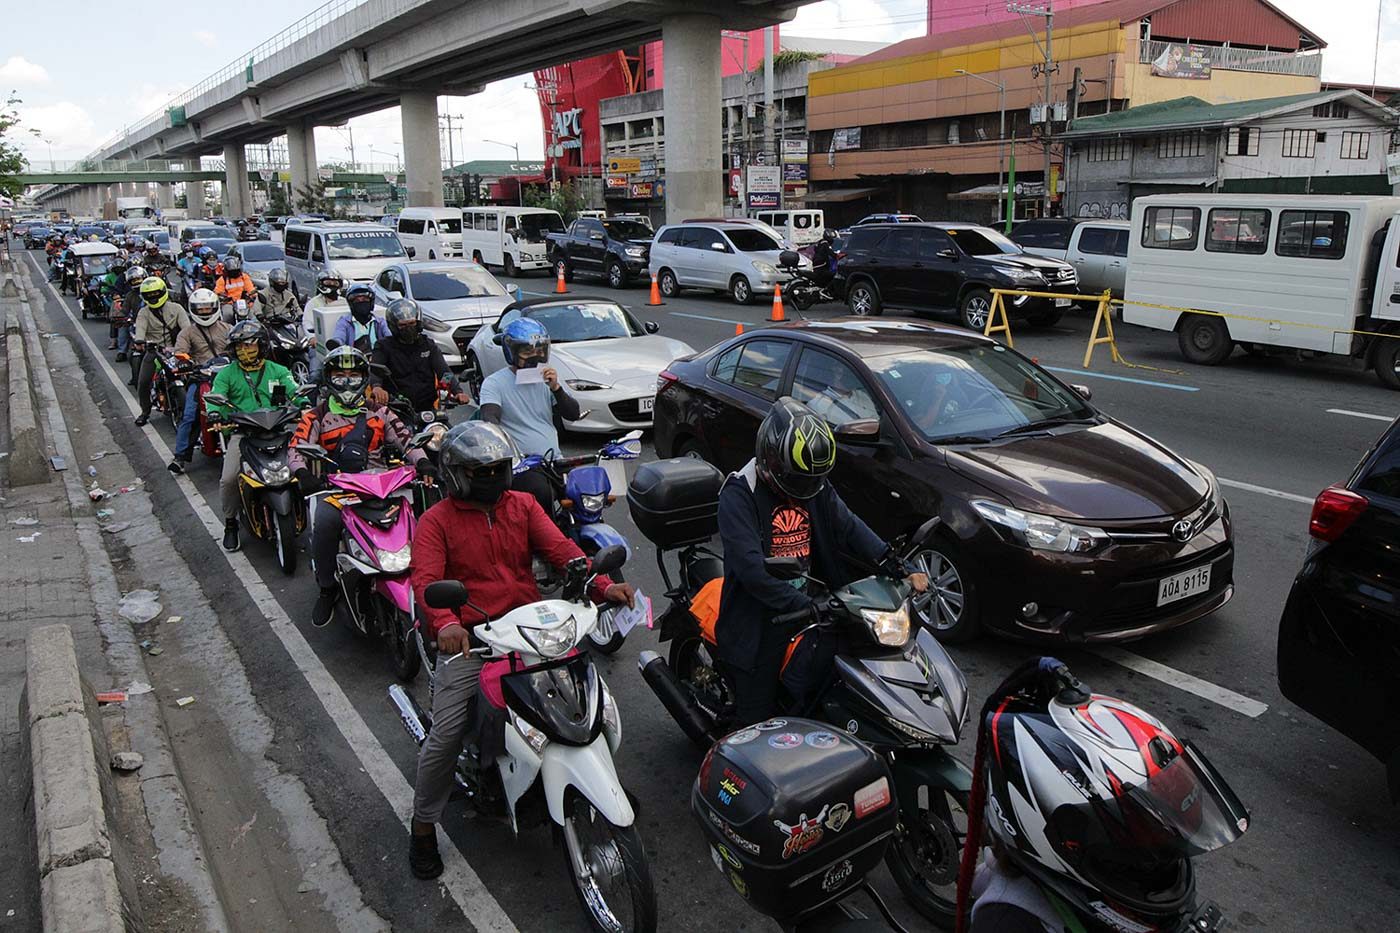 No means of transpo? Employers required to provide shuttle for workers